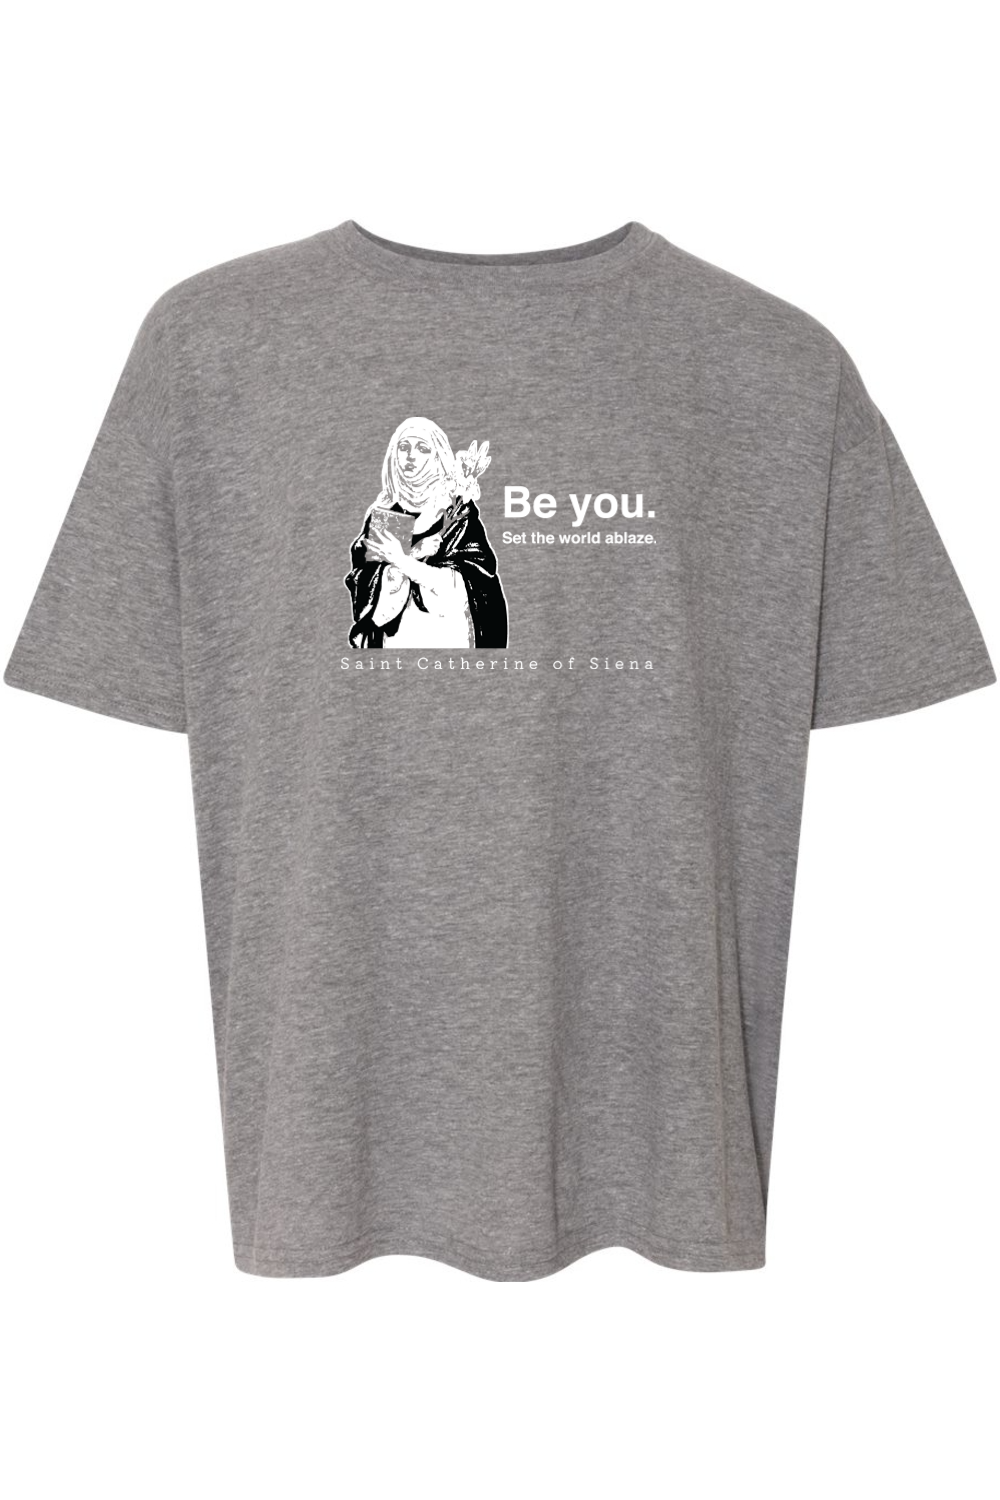 Be You - St. Catherine of Siena Youth T-Shirt